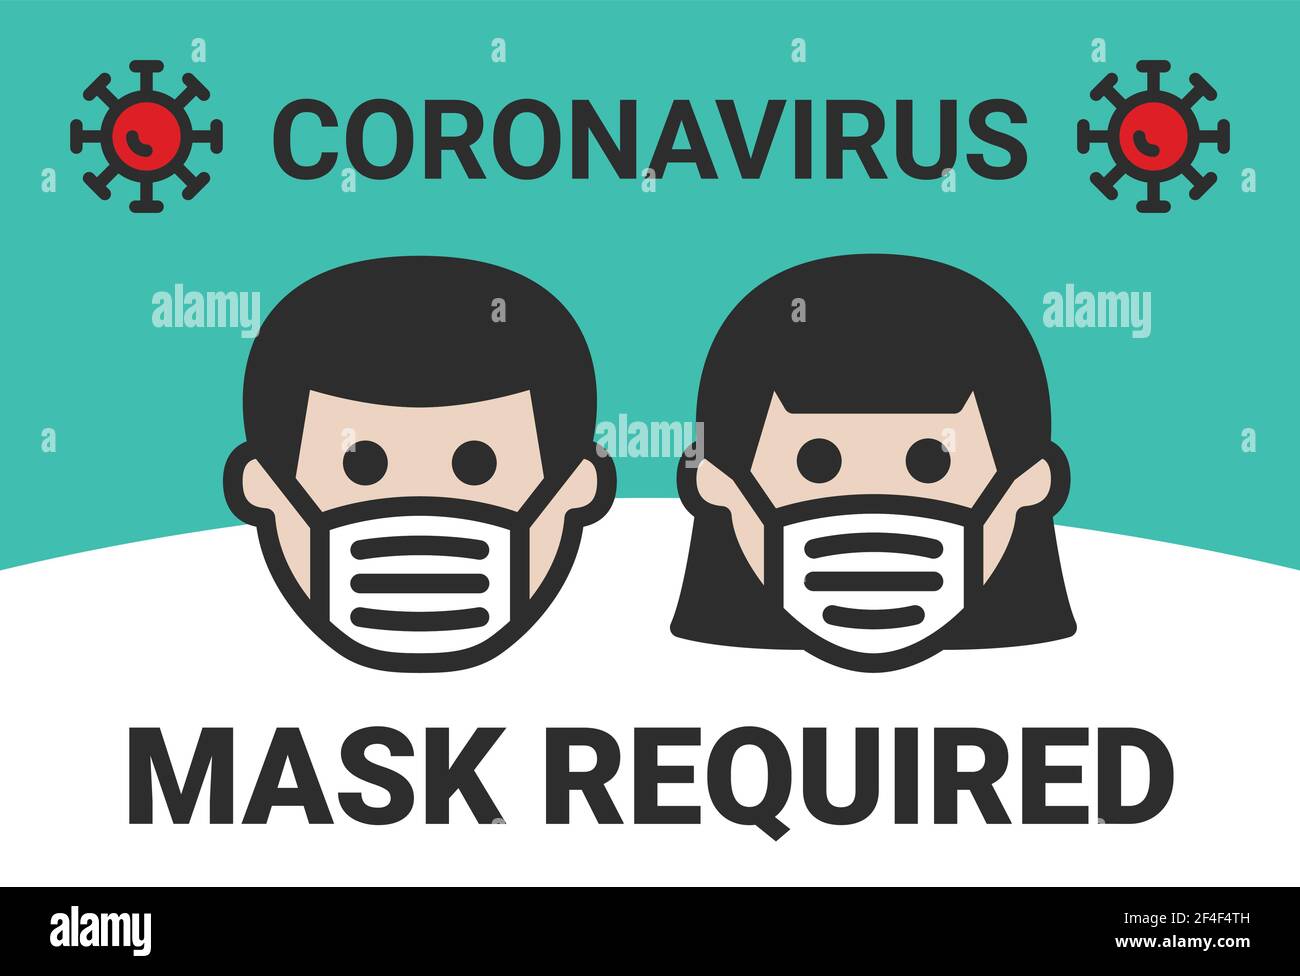 Face Mask Required, No Mask No entry. Coronavirus prevention Sign. Stock Vector